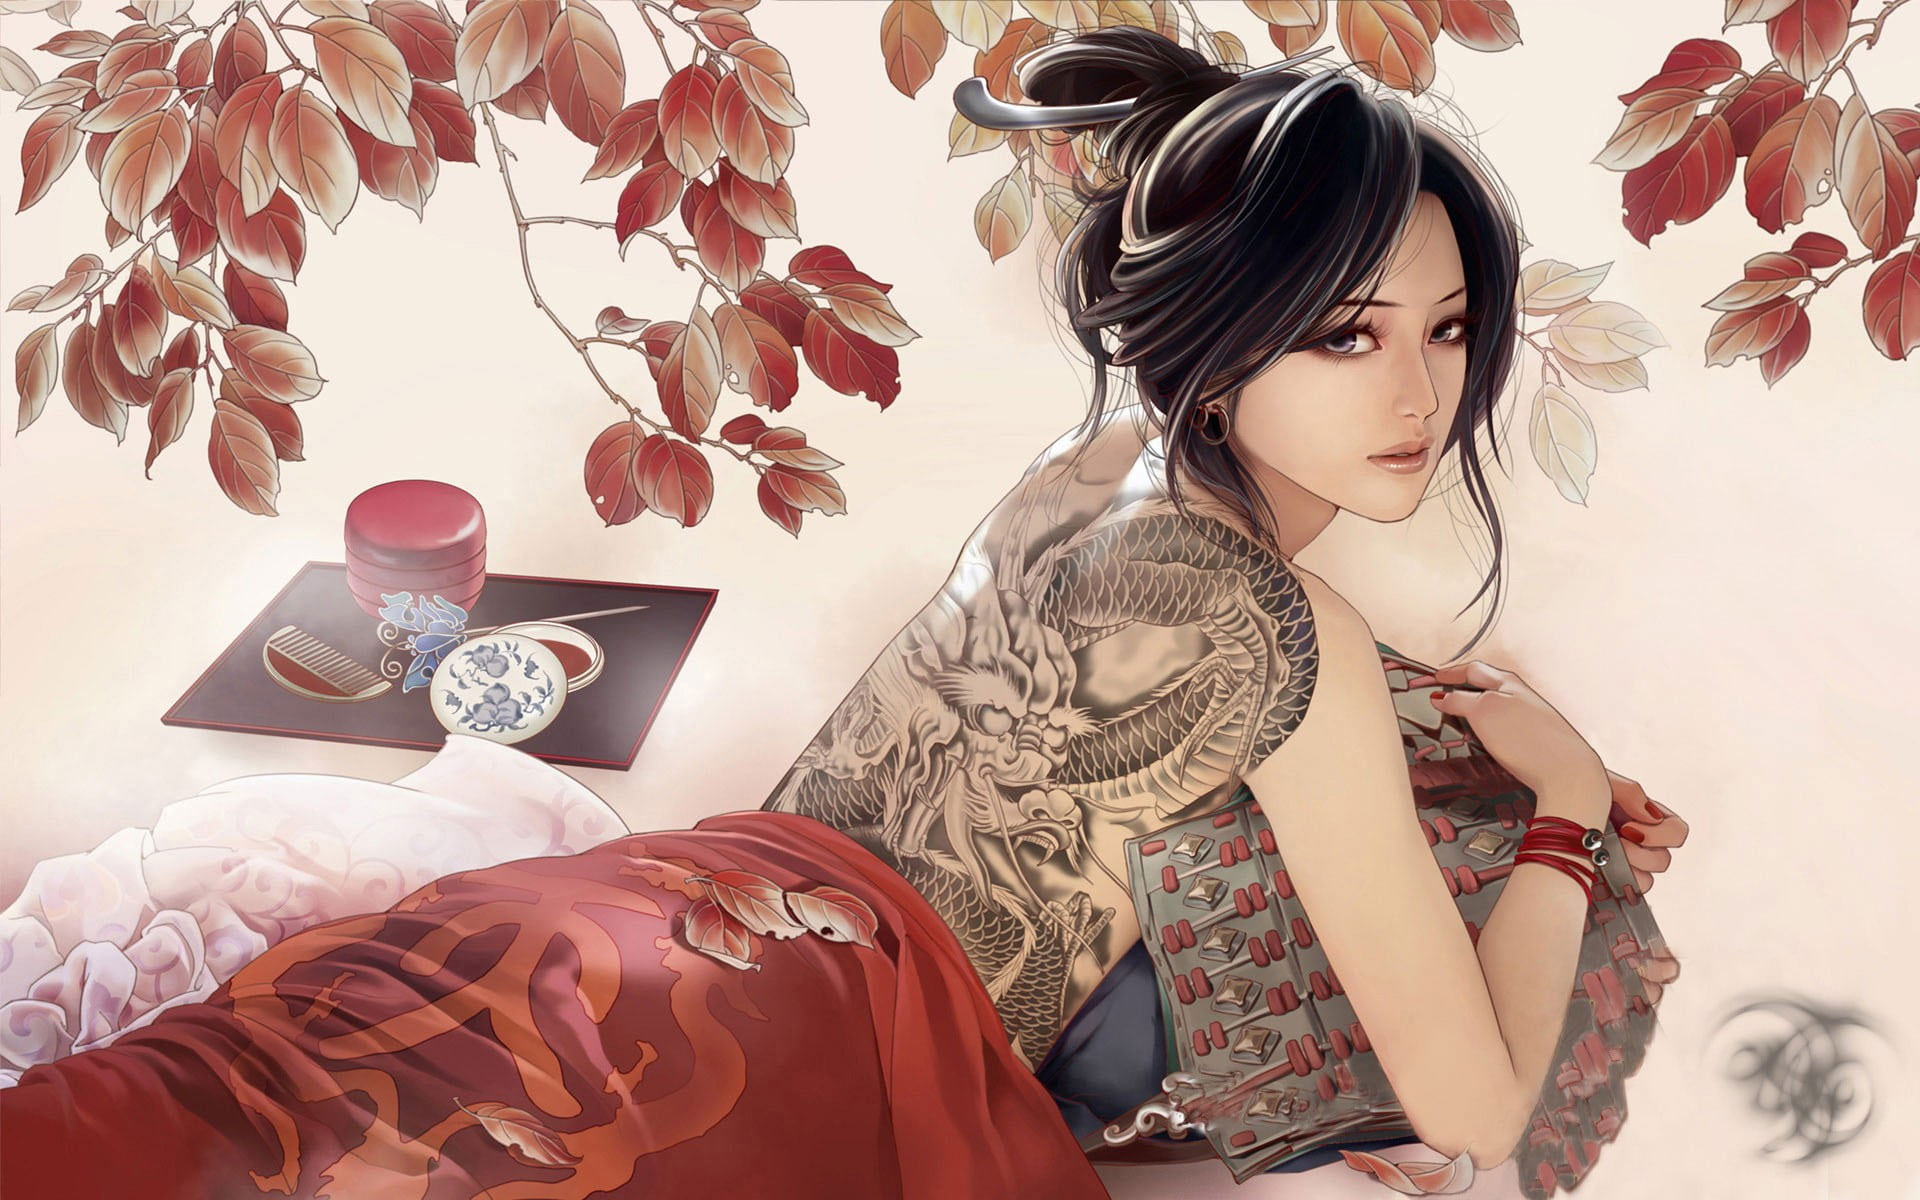 Wallpaper Black Haired Chinese Woman With Dragon Tattoo - Wallpaperforu